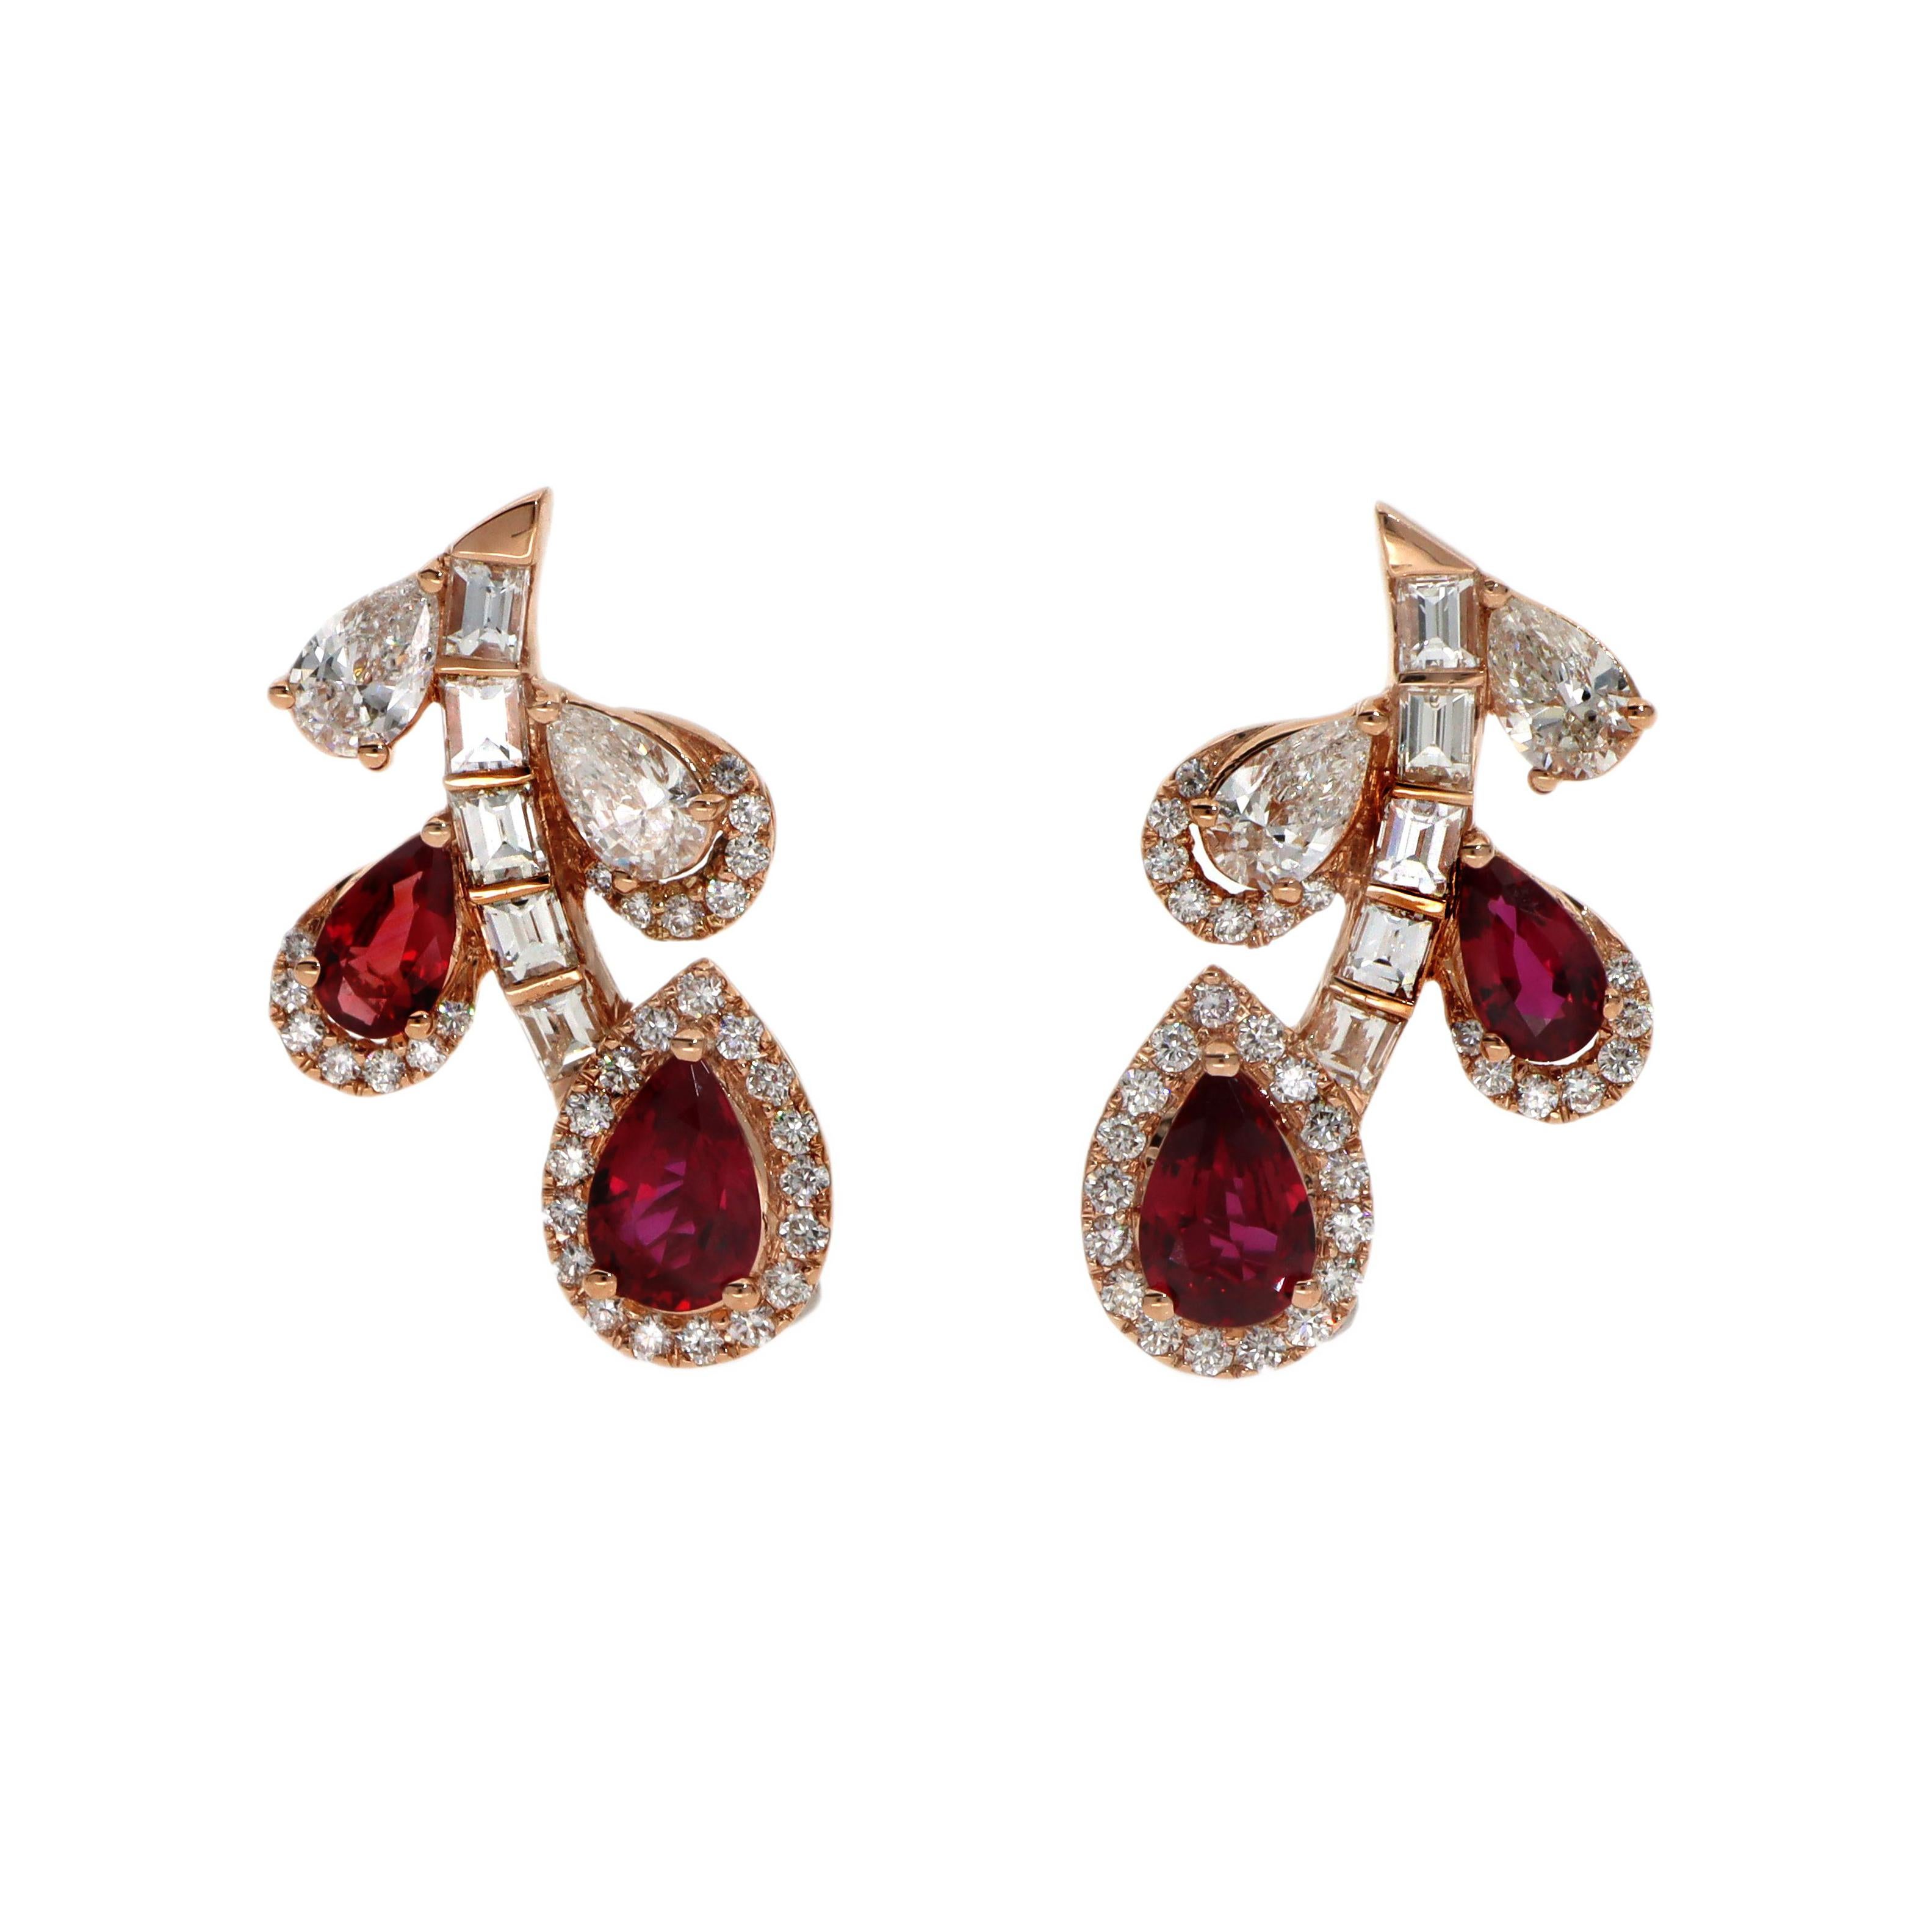 80 Pieces Rubies and Pigeon Red Stones and White Diamonds VVS-VS Clarity  1.29 carat diamonds
Hand made in the Emilio Jewelry Atelier, whom specializes in rare collectible pieces in Natural ultra rare fancy colored Diamonds and precious